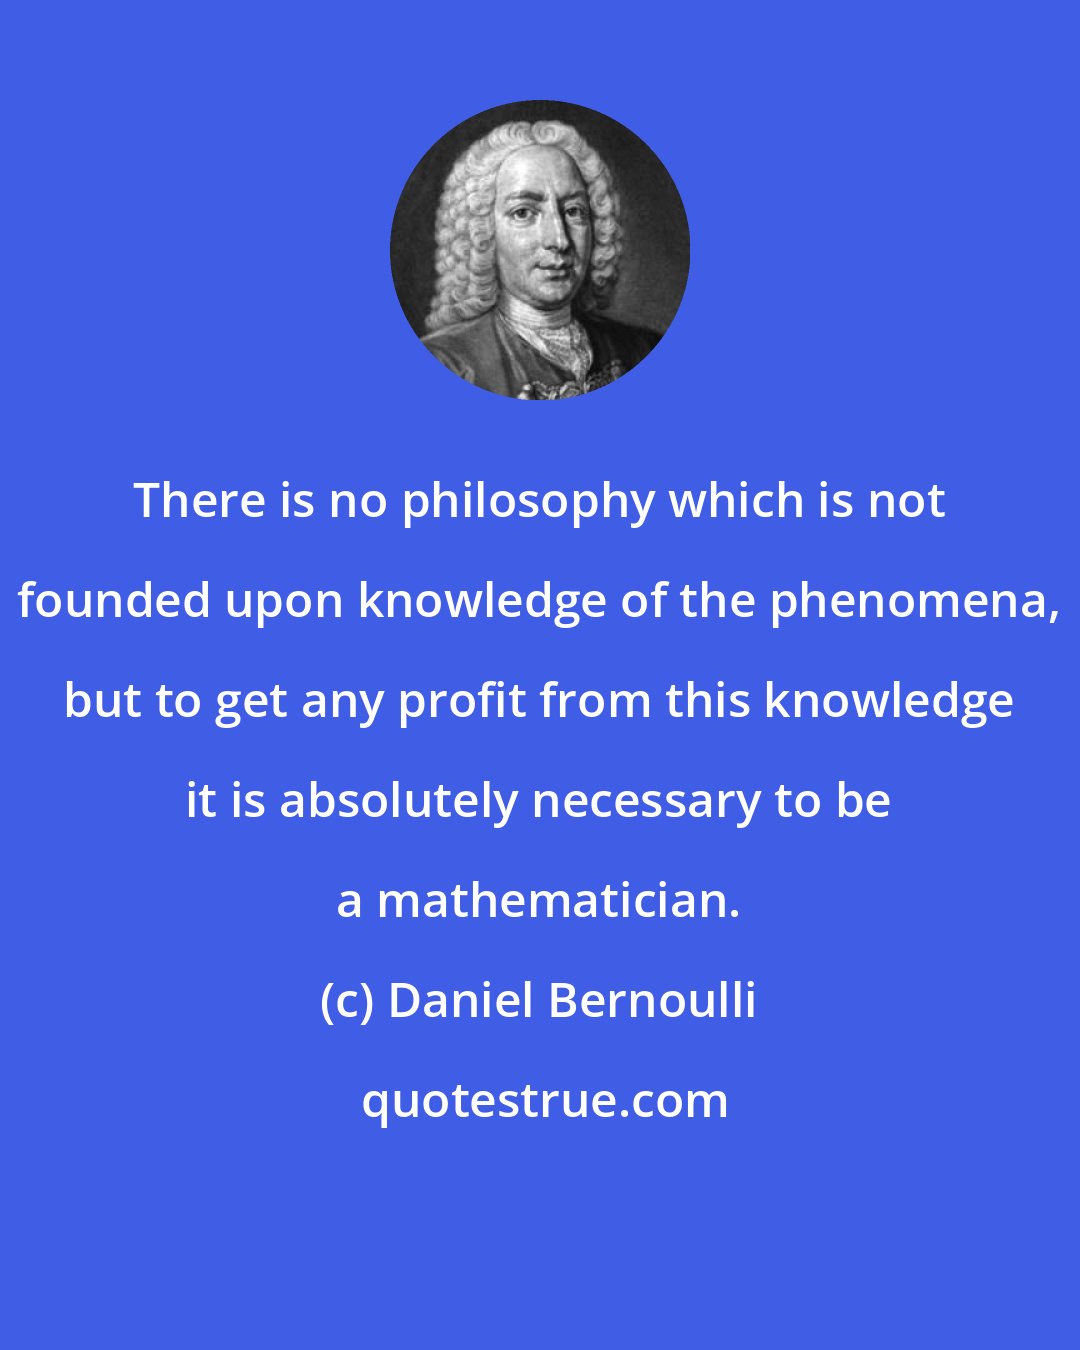 Daniel Bernoulli: There is no philosophy which is not founded upon knowledge of the phenomena, but to get any profit from this knowledge it is absolutely necessary to be a mathematician.